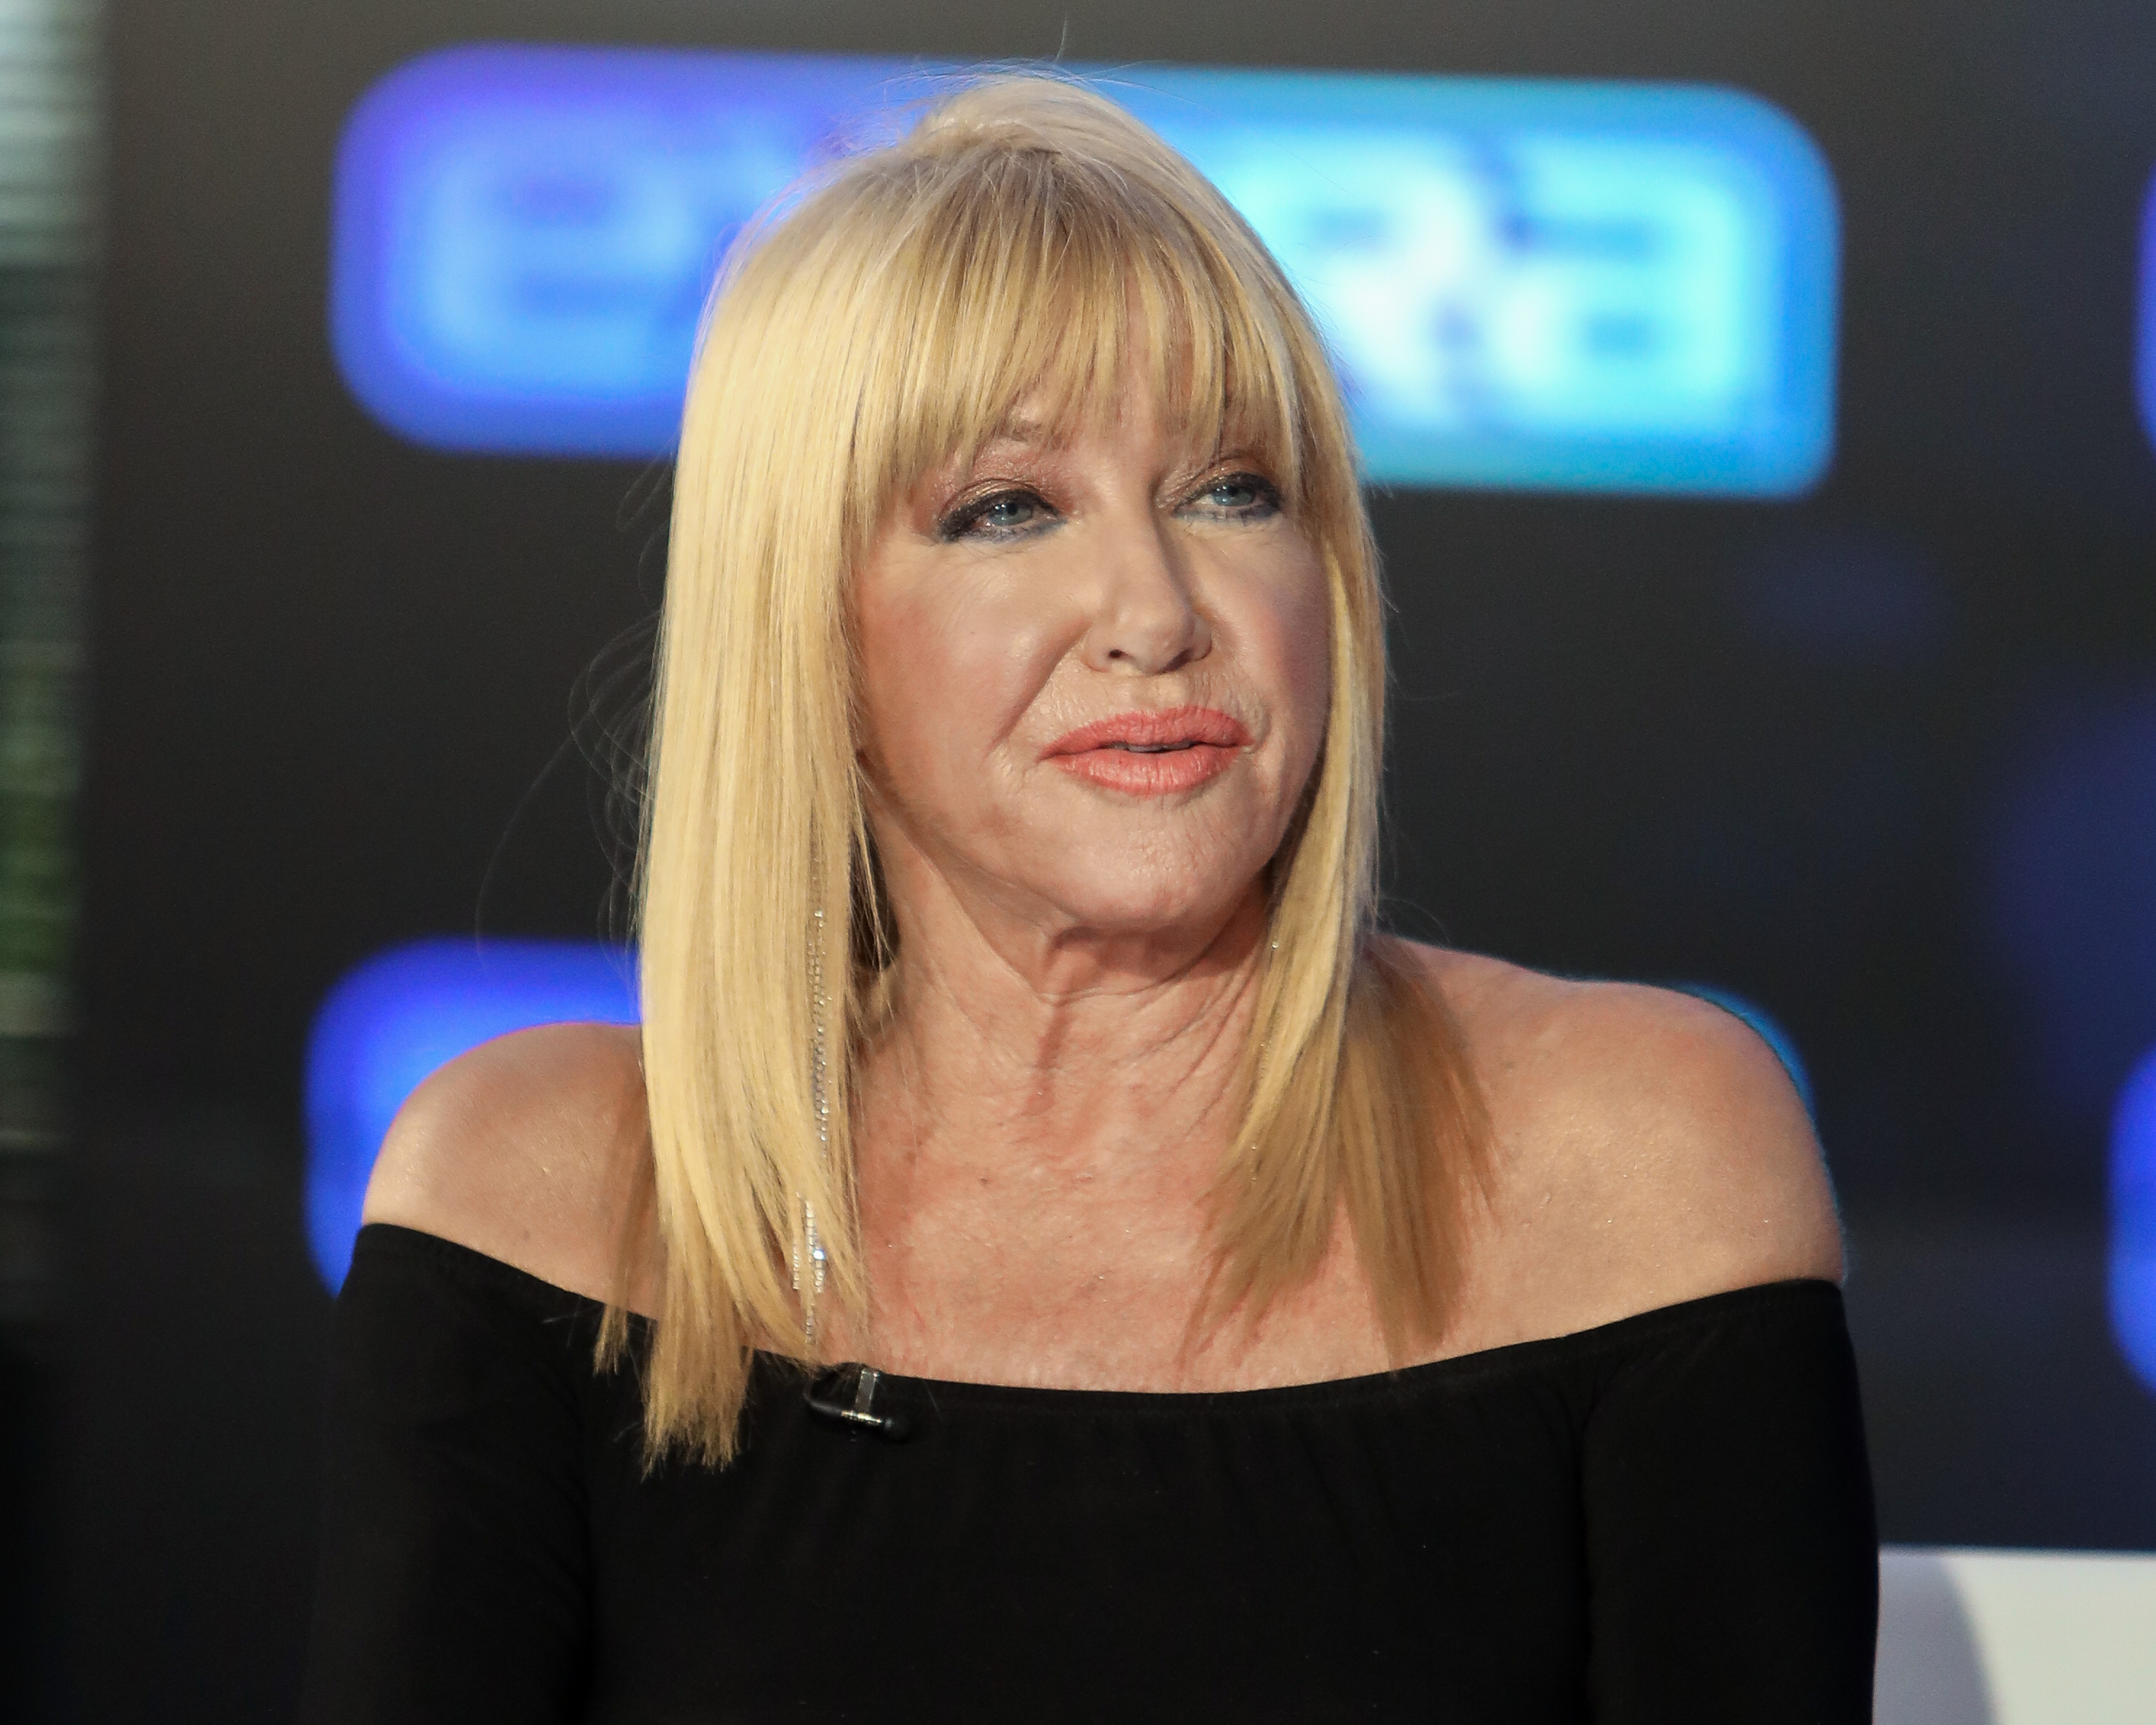 Suzanne Somers visits “Extra” on February 19, 2020, in Burbank, California | Source: Getty Images